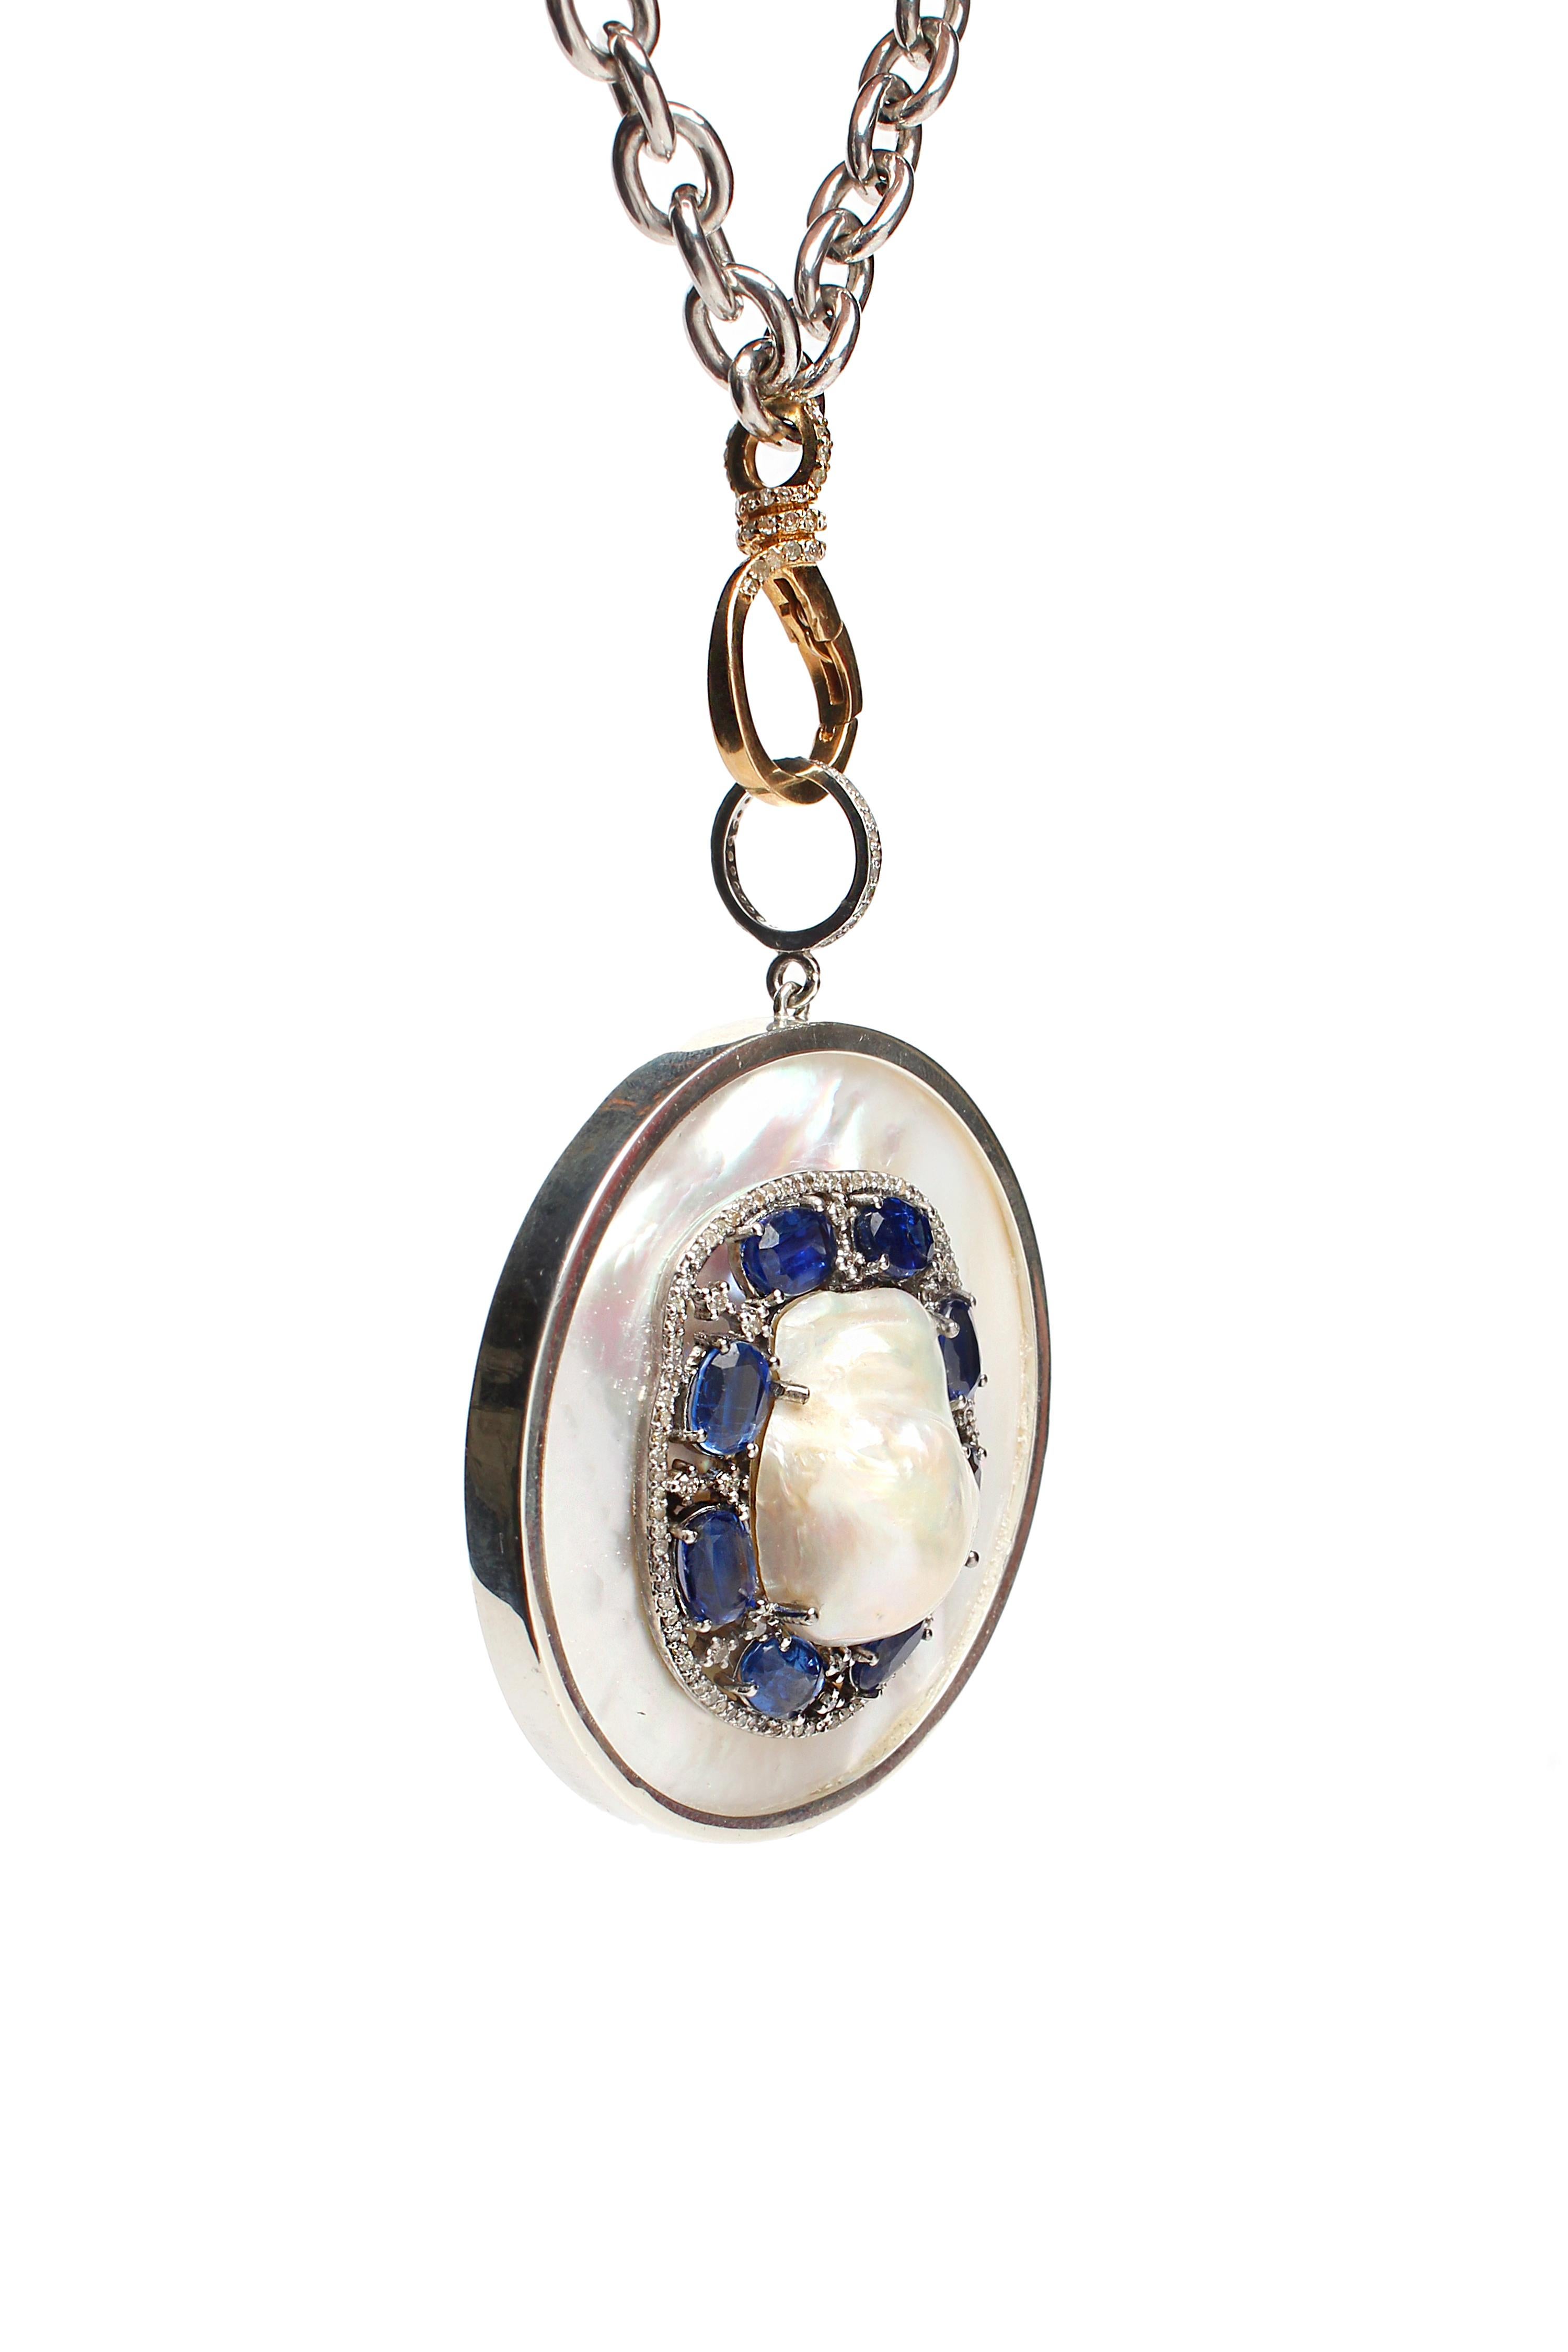 Contemporary CLARISSA BRONFMAN Mother Of Pearl Sapphire Pearl Diamond Sterling Silver Pendant For Sale